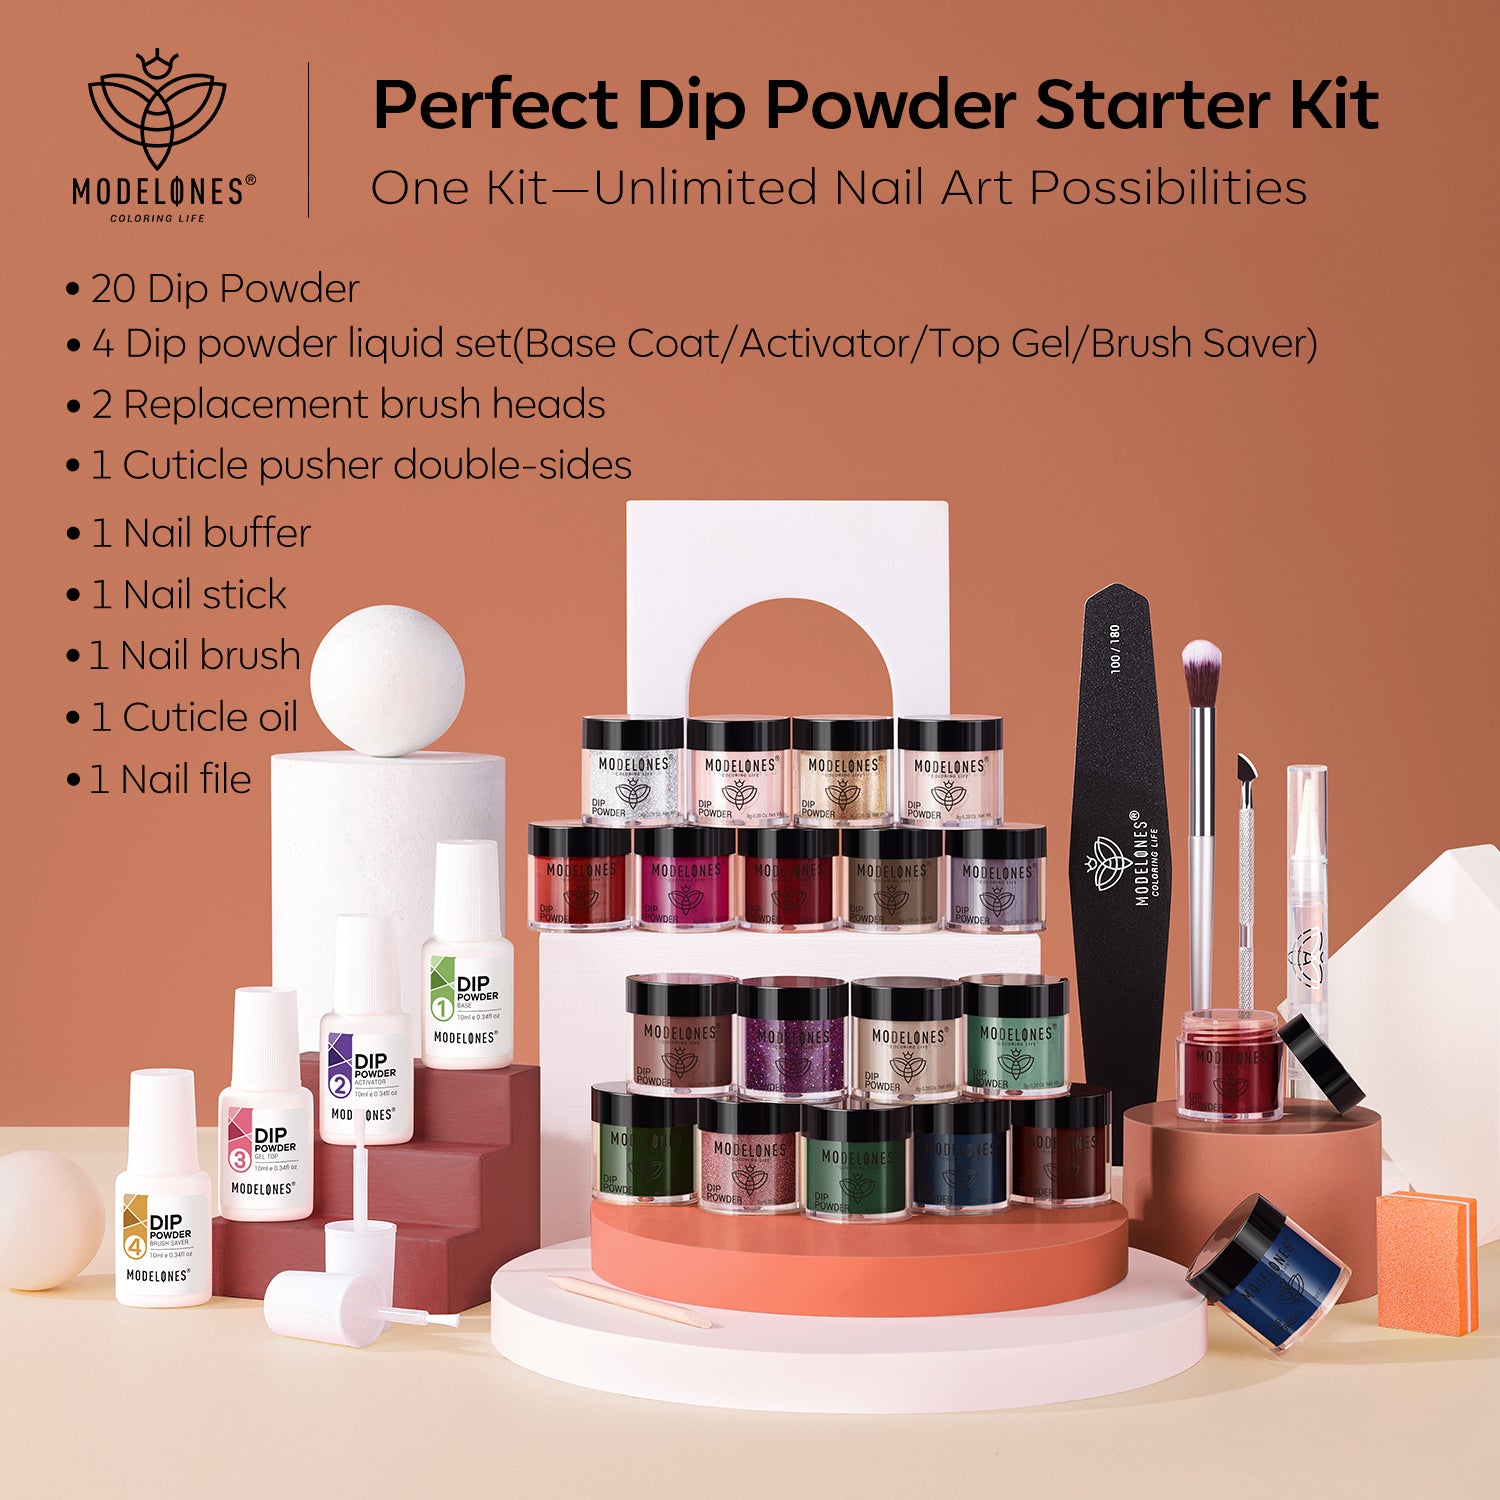 Making Waves - 32Pcs 20Colors Dipping Powder All-In-One Kit【US ONLY】